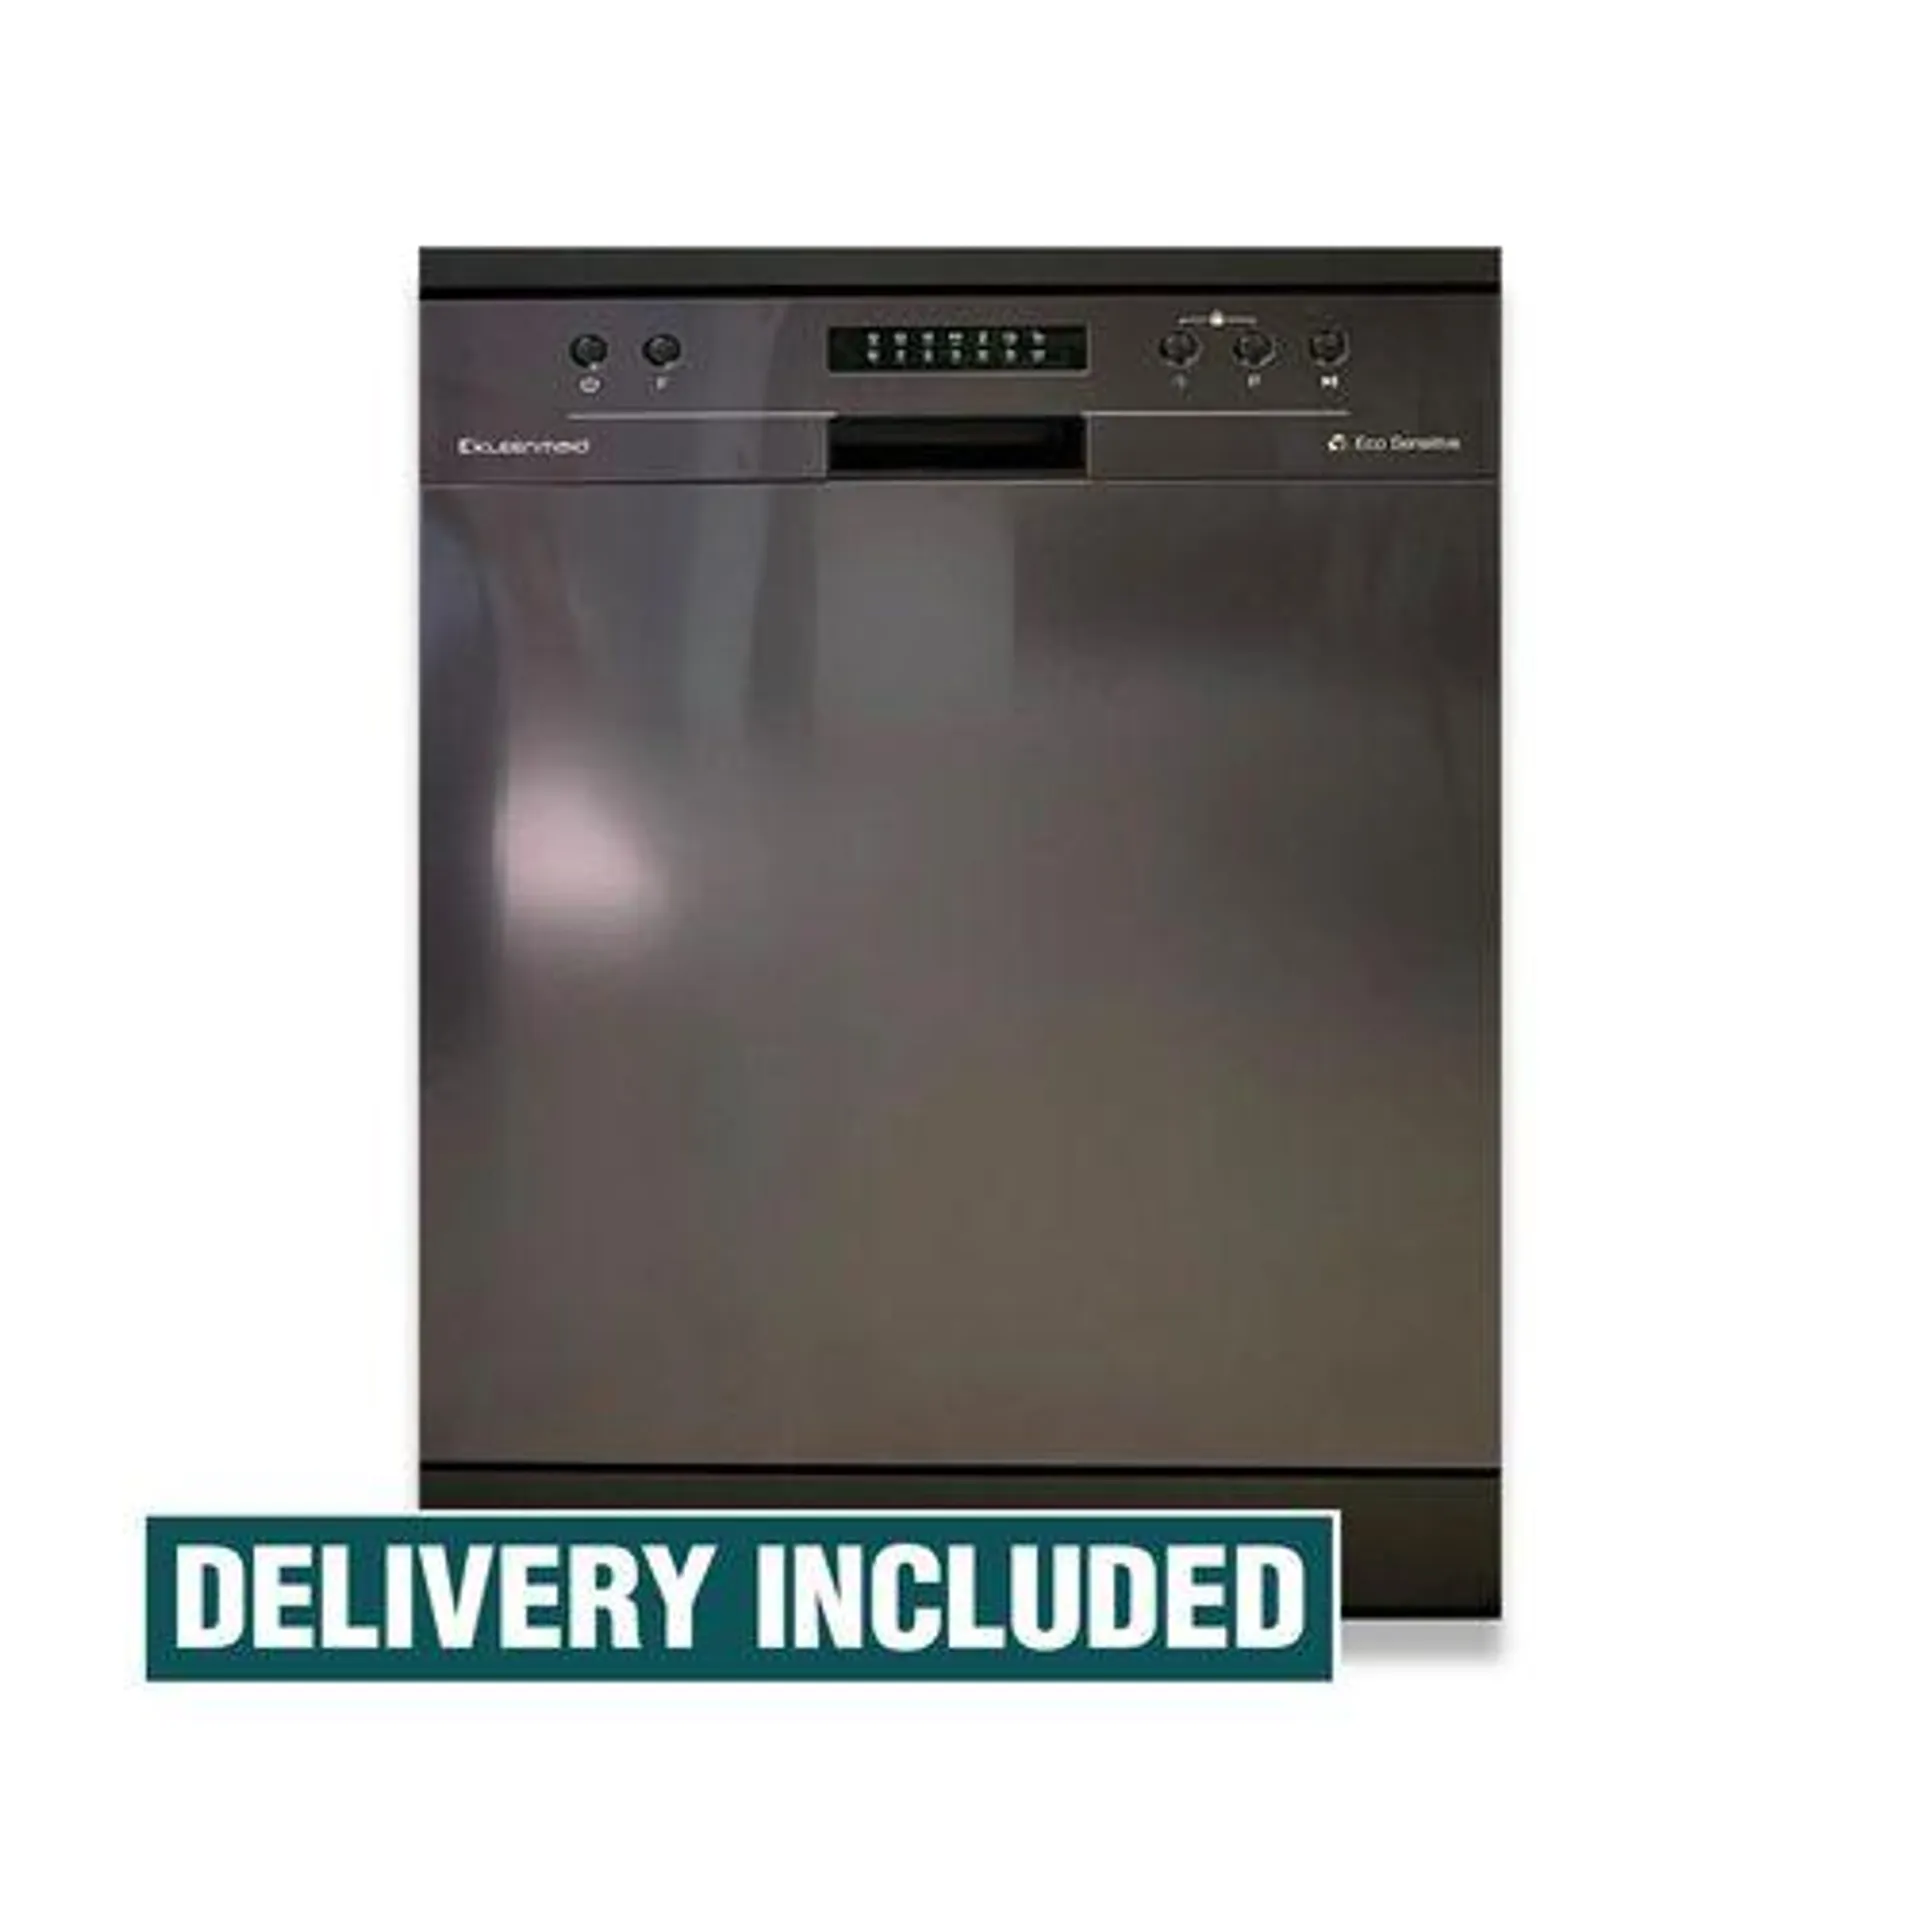 Kleenmaid Black Stainless Steel Free Standing Or Built Under Dishwasher WELS 4.5 Star 10.5L/W